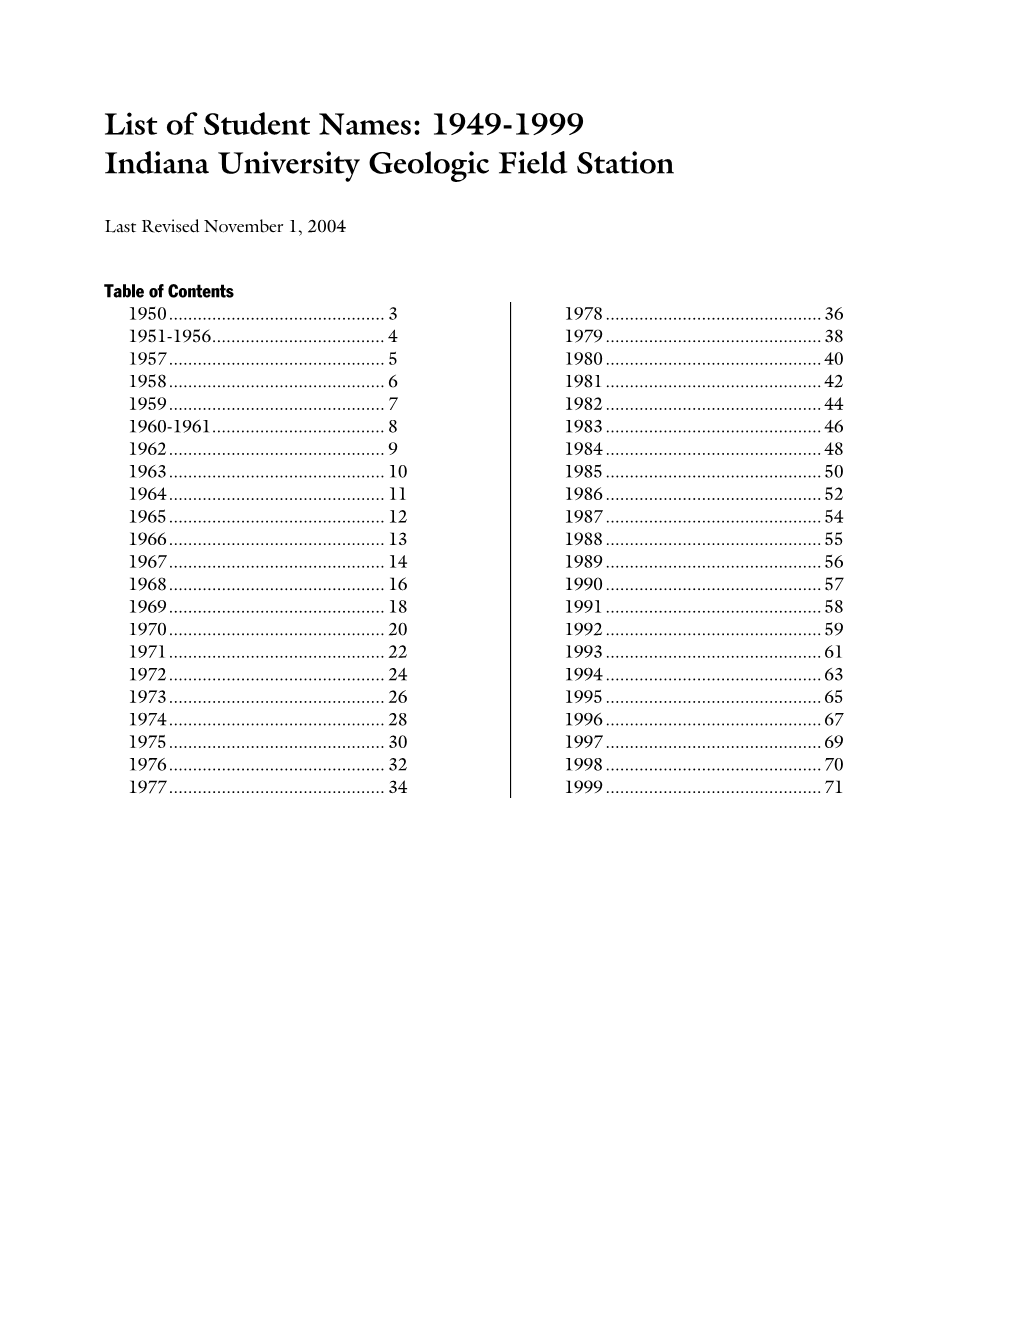 List of Student Names: 1949-1999 Indiana University Geologic Field Station